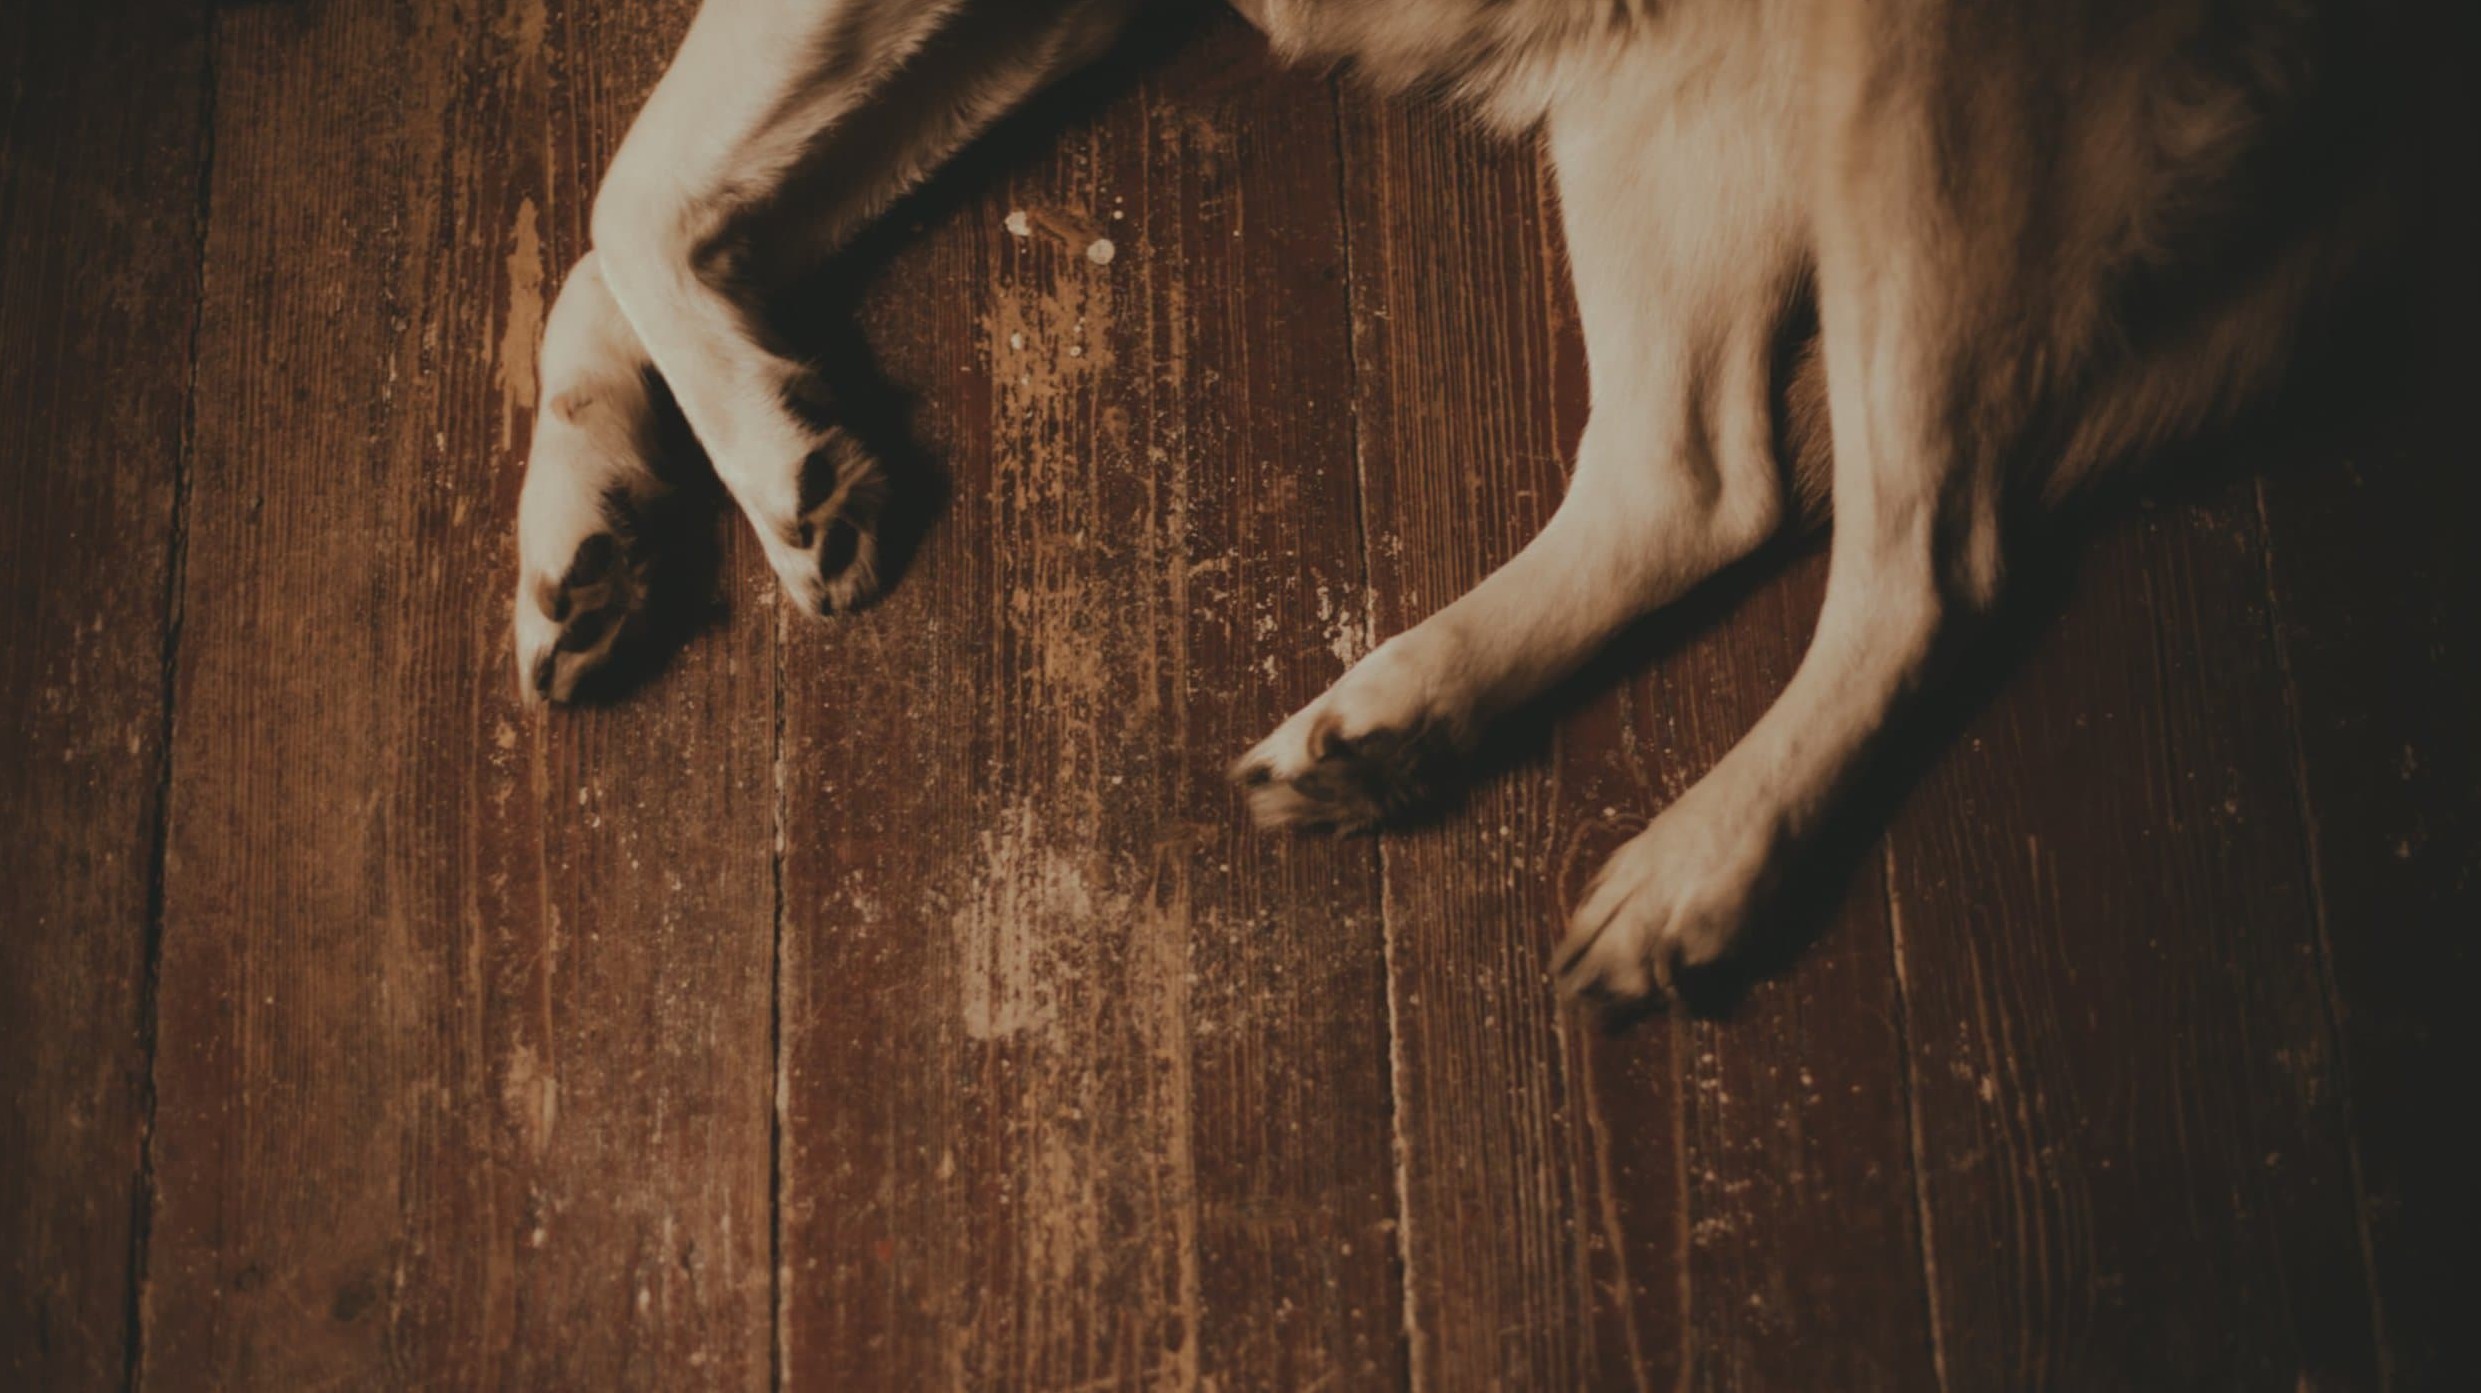 Dog's legs and paws